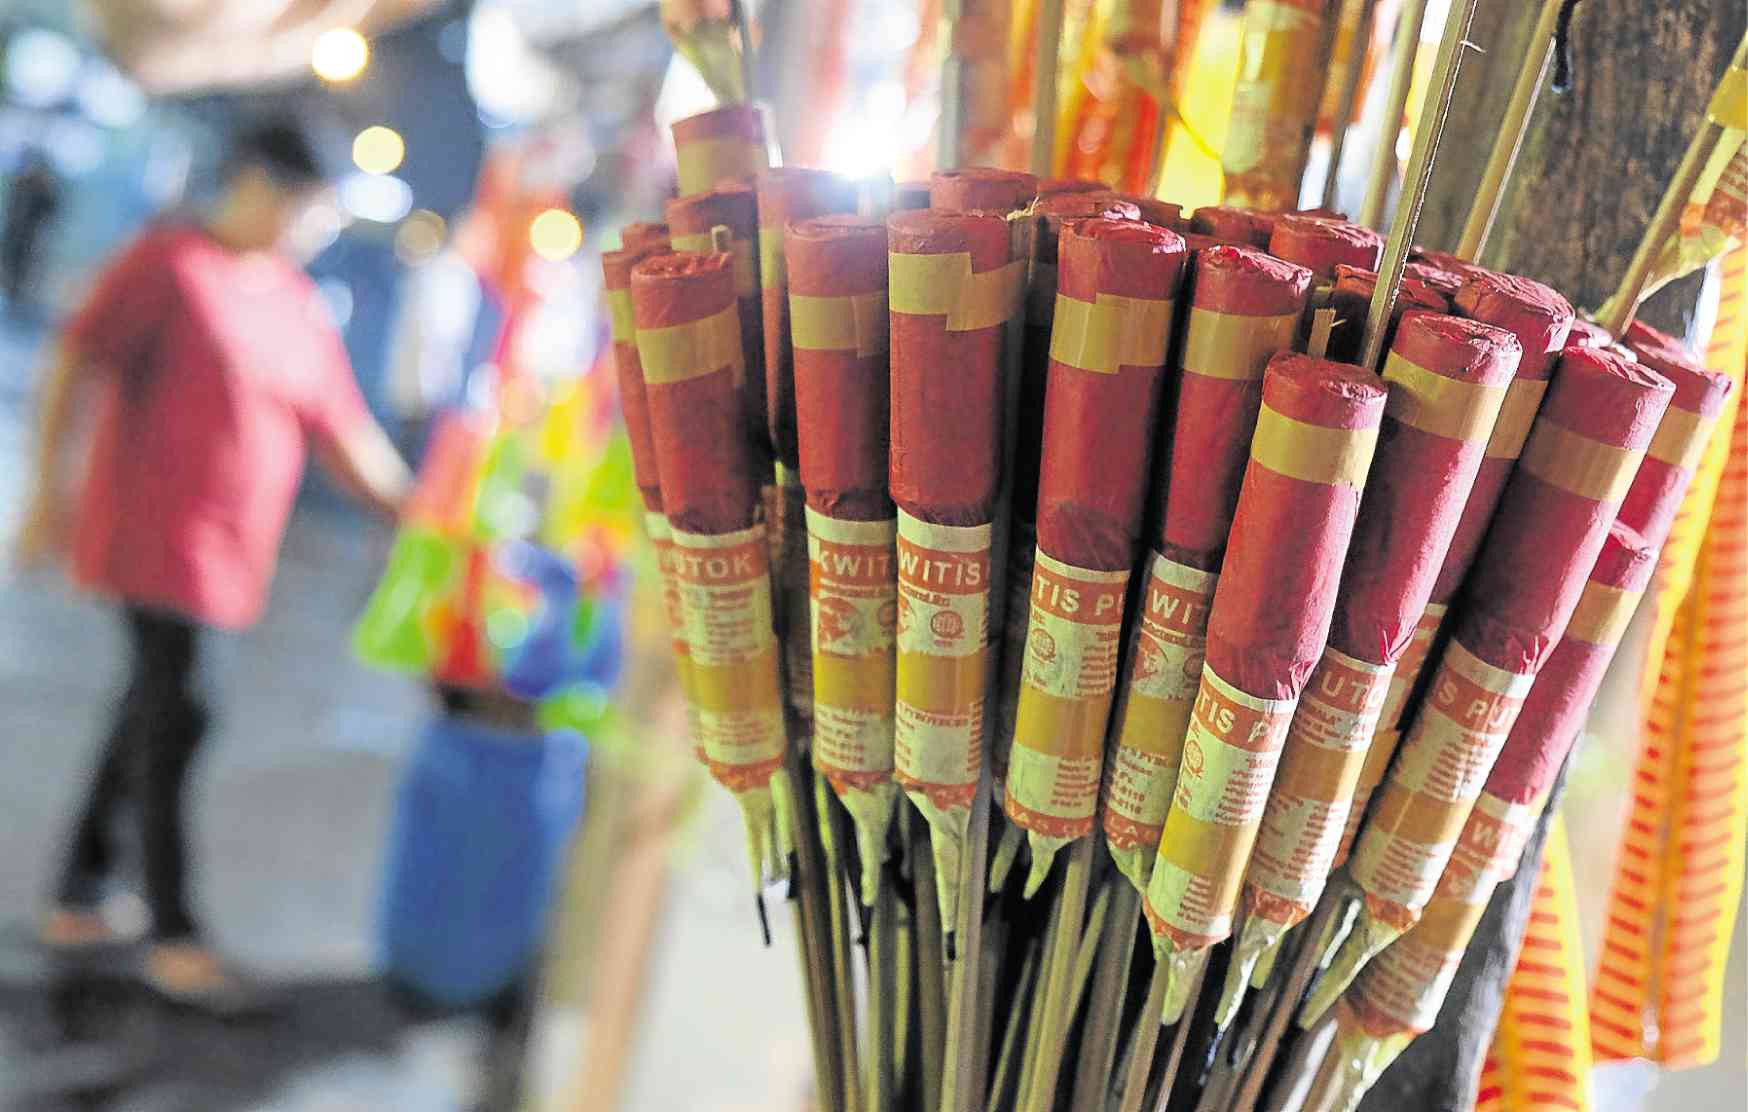 Fireworks-related injuries rise to 8 – DOH